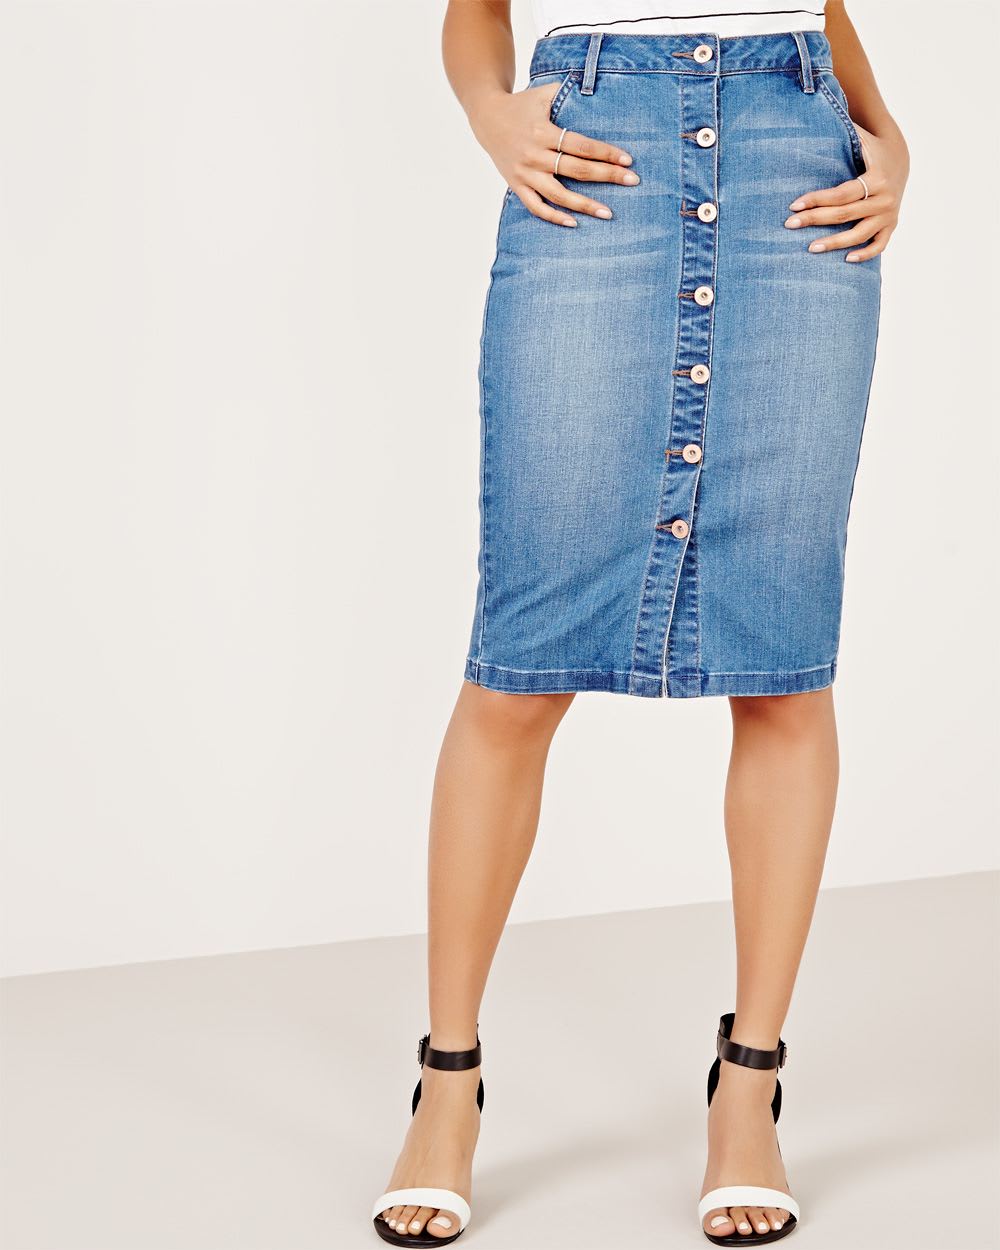 Denim pencil skirt with buttons | RW&CO.